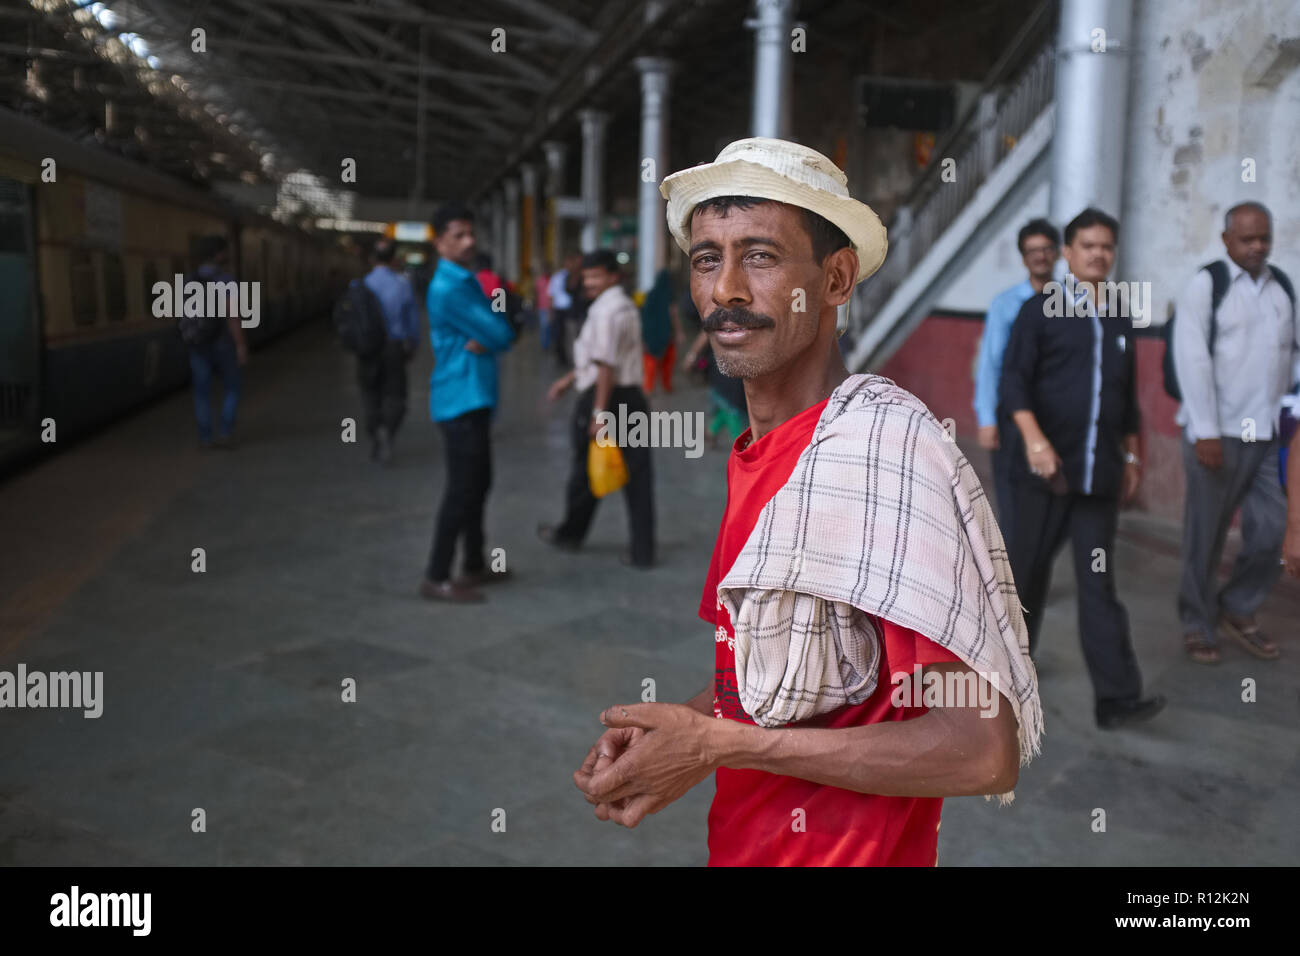 A porter at Chhatrapati Shivaji Maharaj Terminus (CSMT) in Mumbai, India, enjoying at bit of spare time before the next load of goods comes in Stock Photo